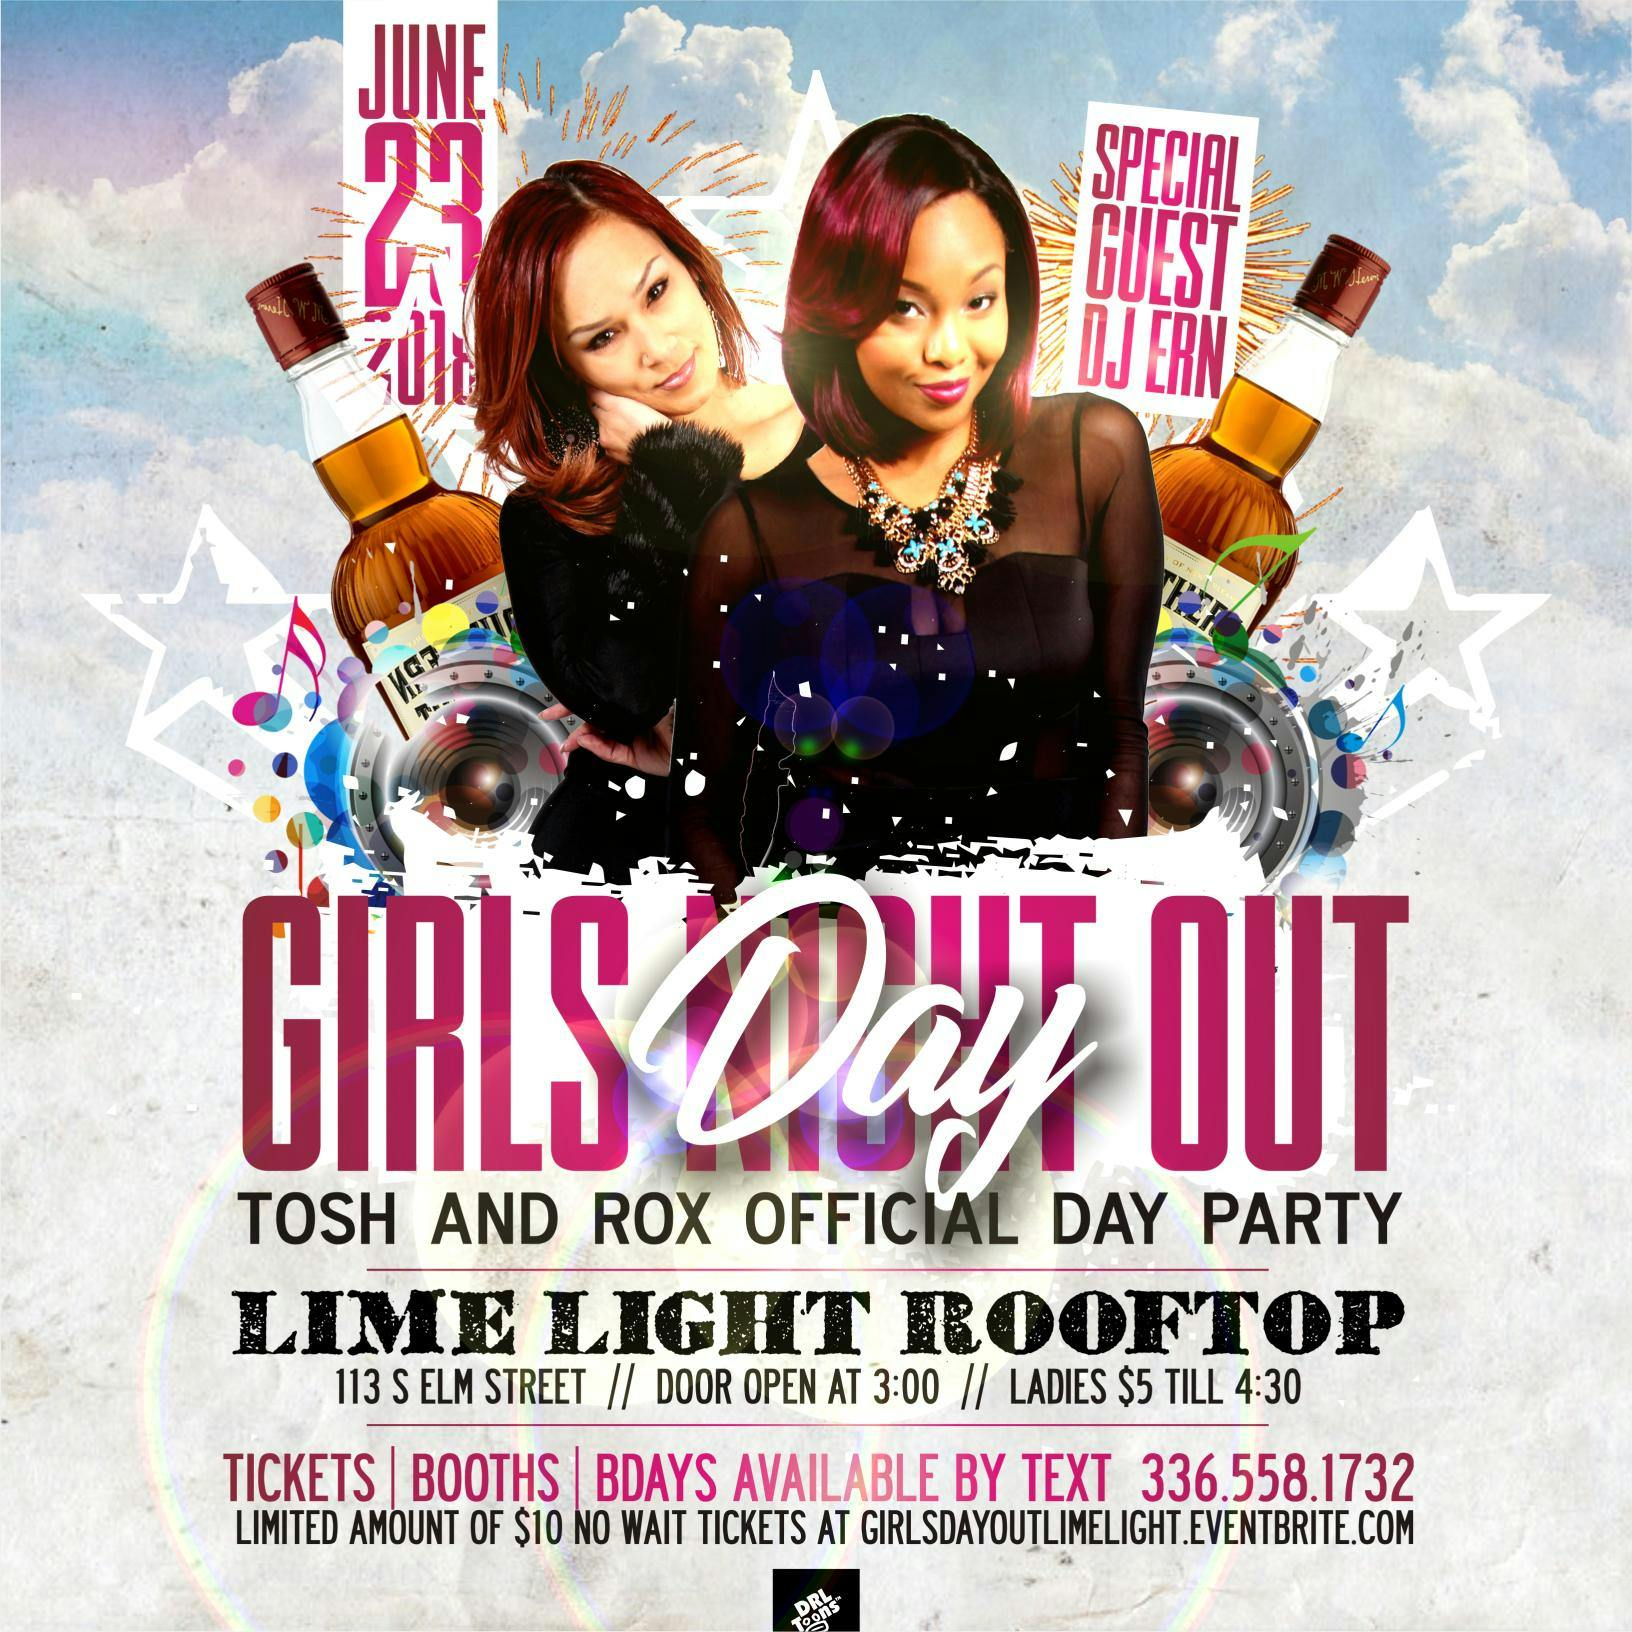 Girls Day Out: Tosh and Rox Offical Day Party